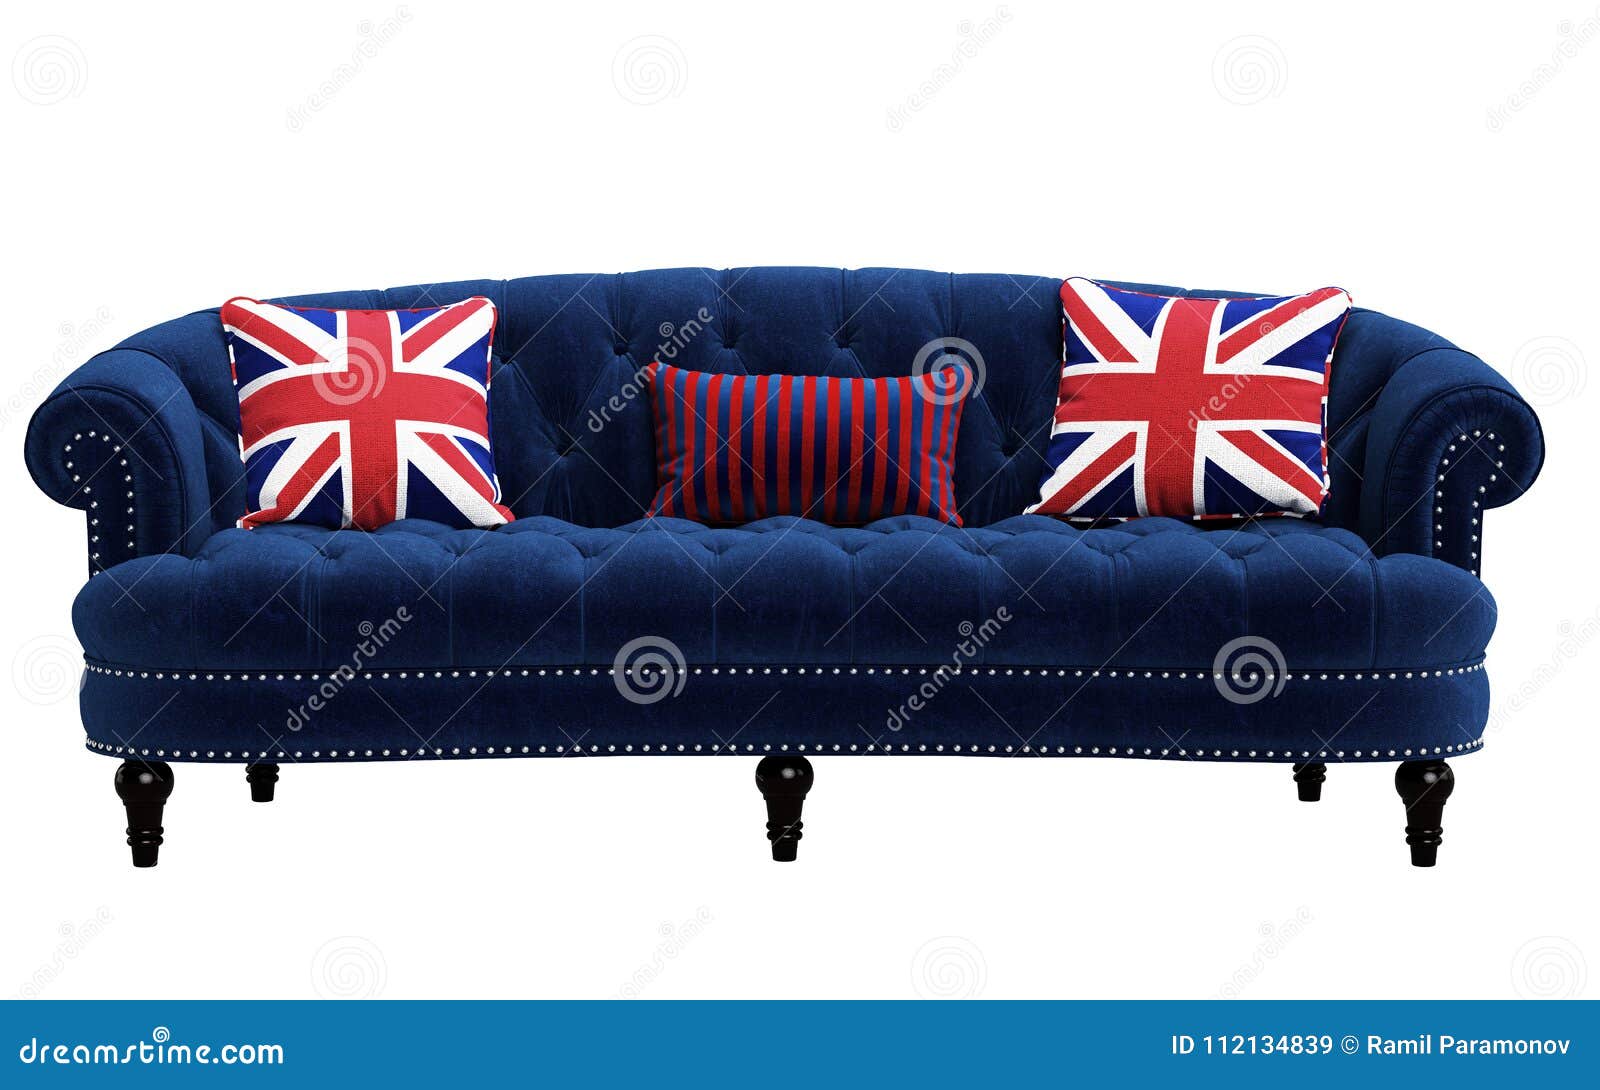 Classic Blue Sofa Pillows With British Flag Pattern Isolated On